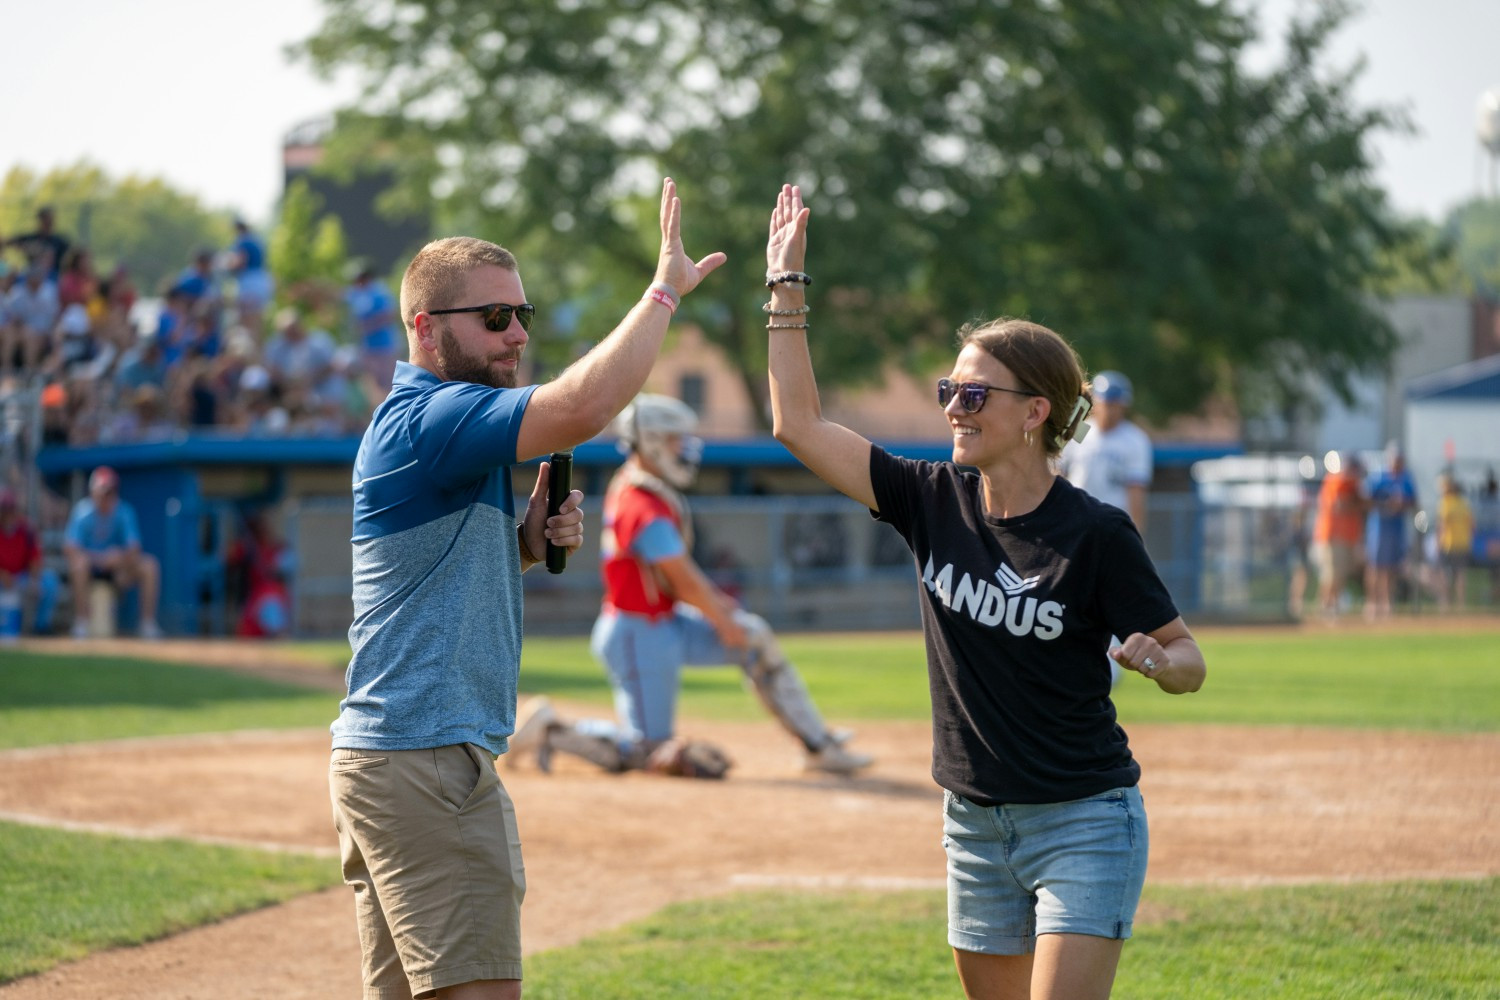 Landus was the head sponsor of the record-attendance-setting  game where Landus staff got to throw out the first pitch. 